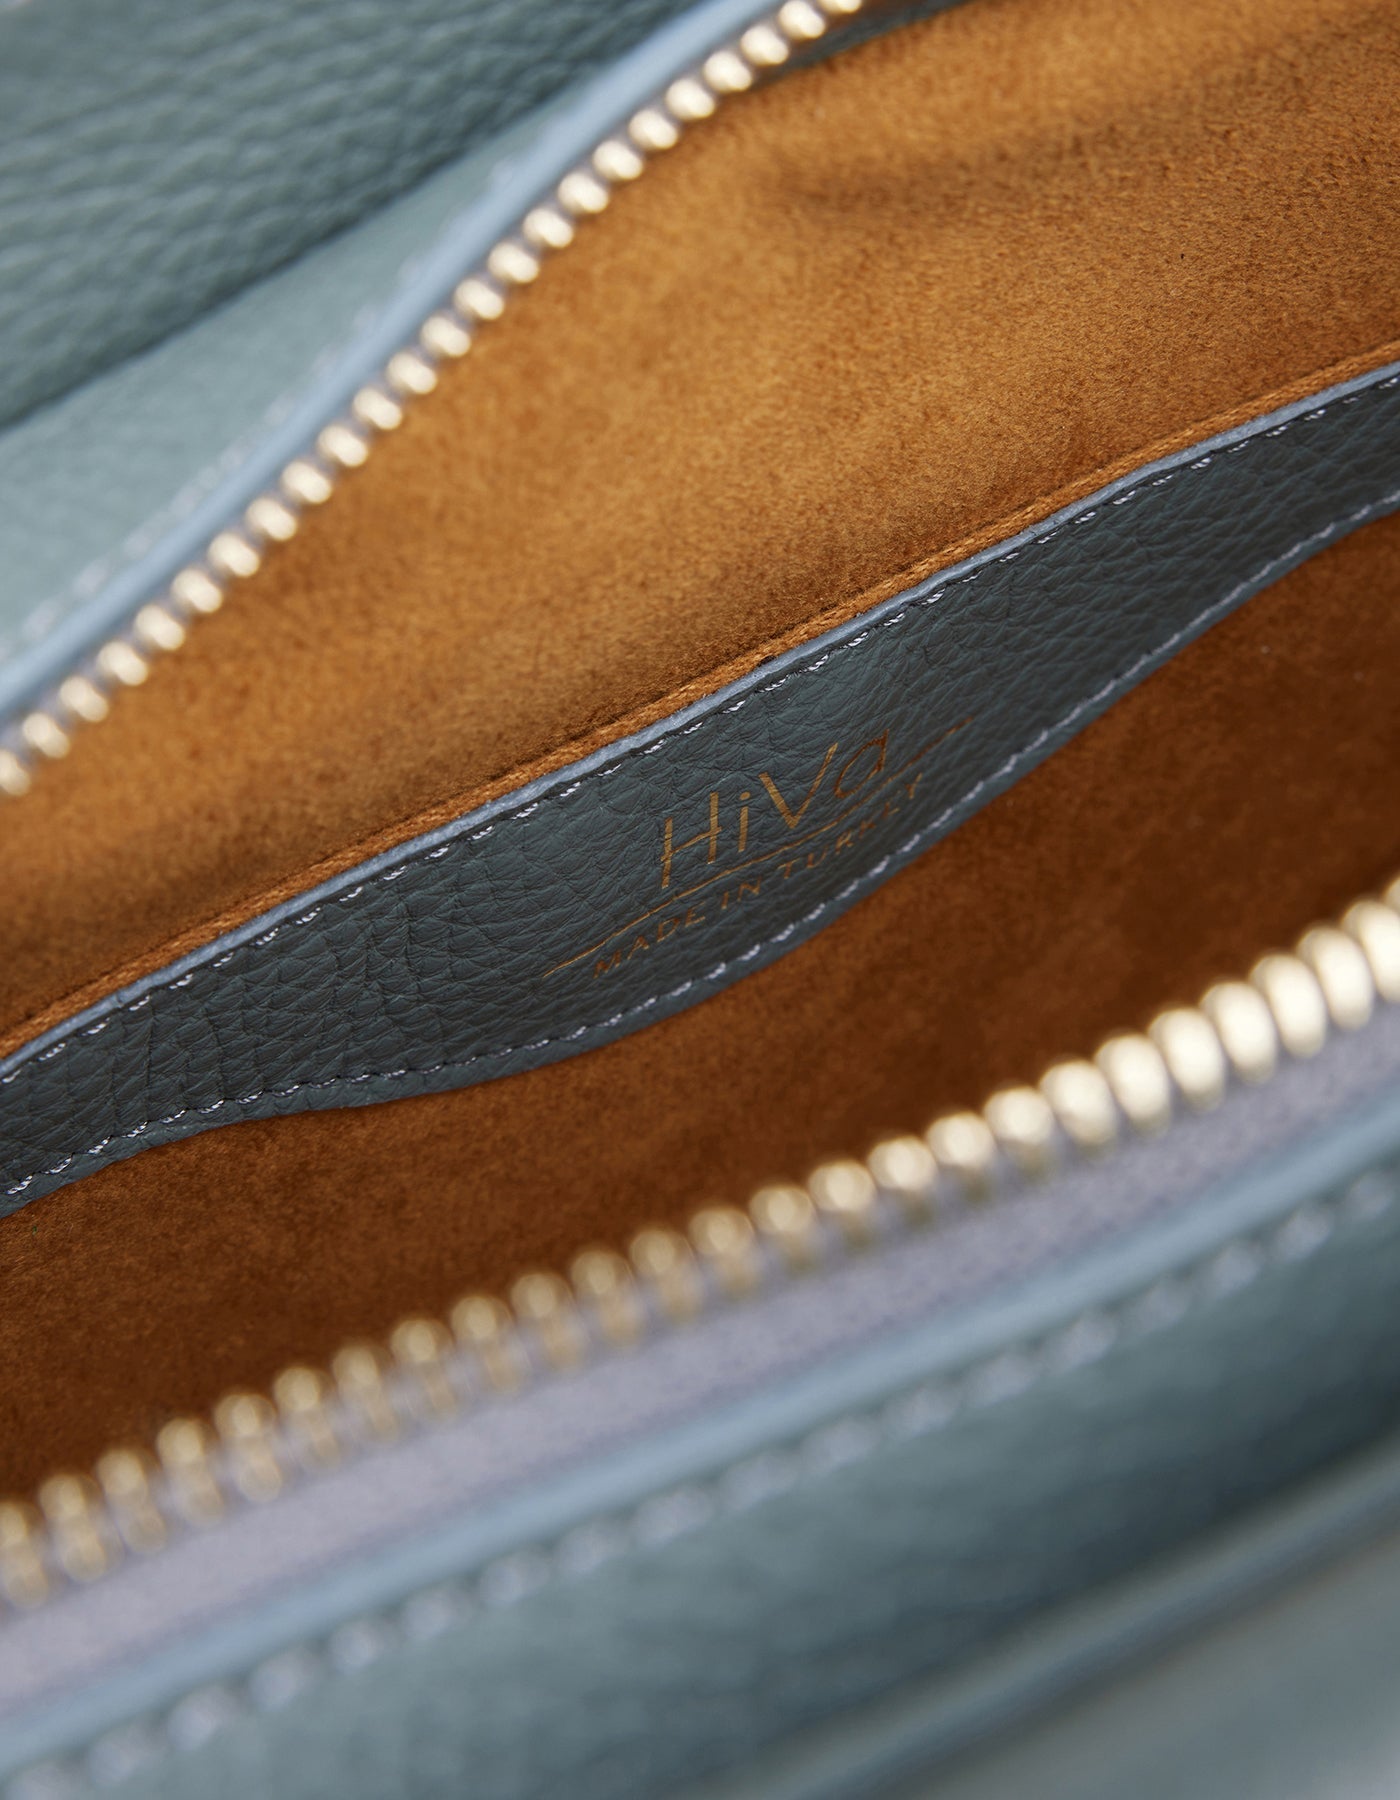 Orbis Tote Bag - Finest Quality HiVa Atelier GmbH Leather Accessories